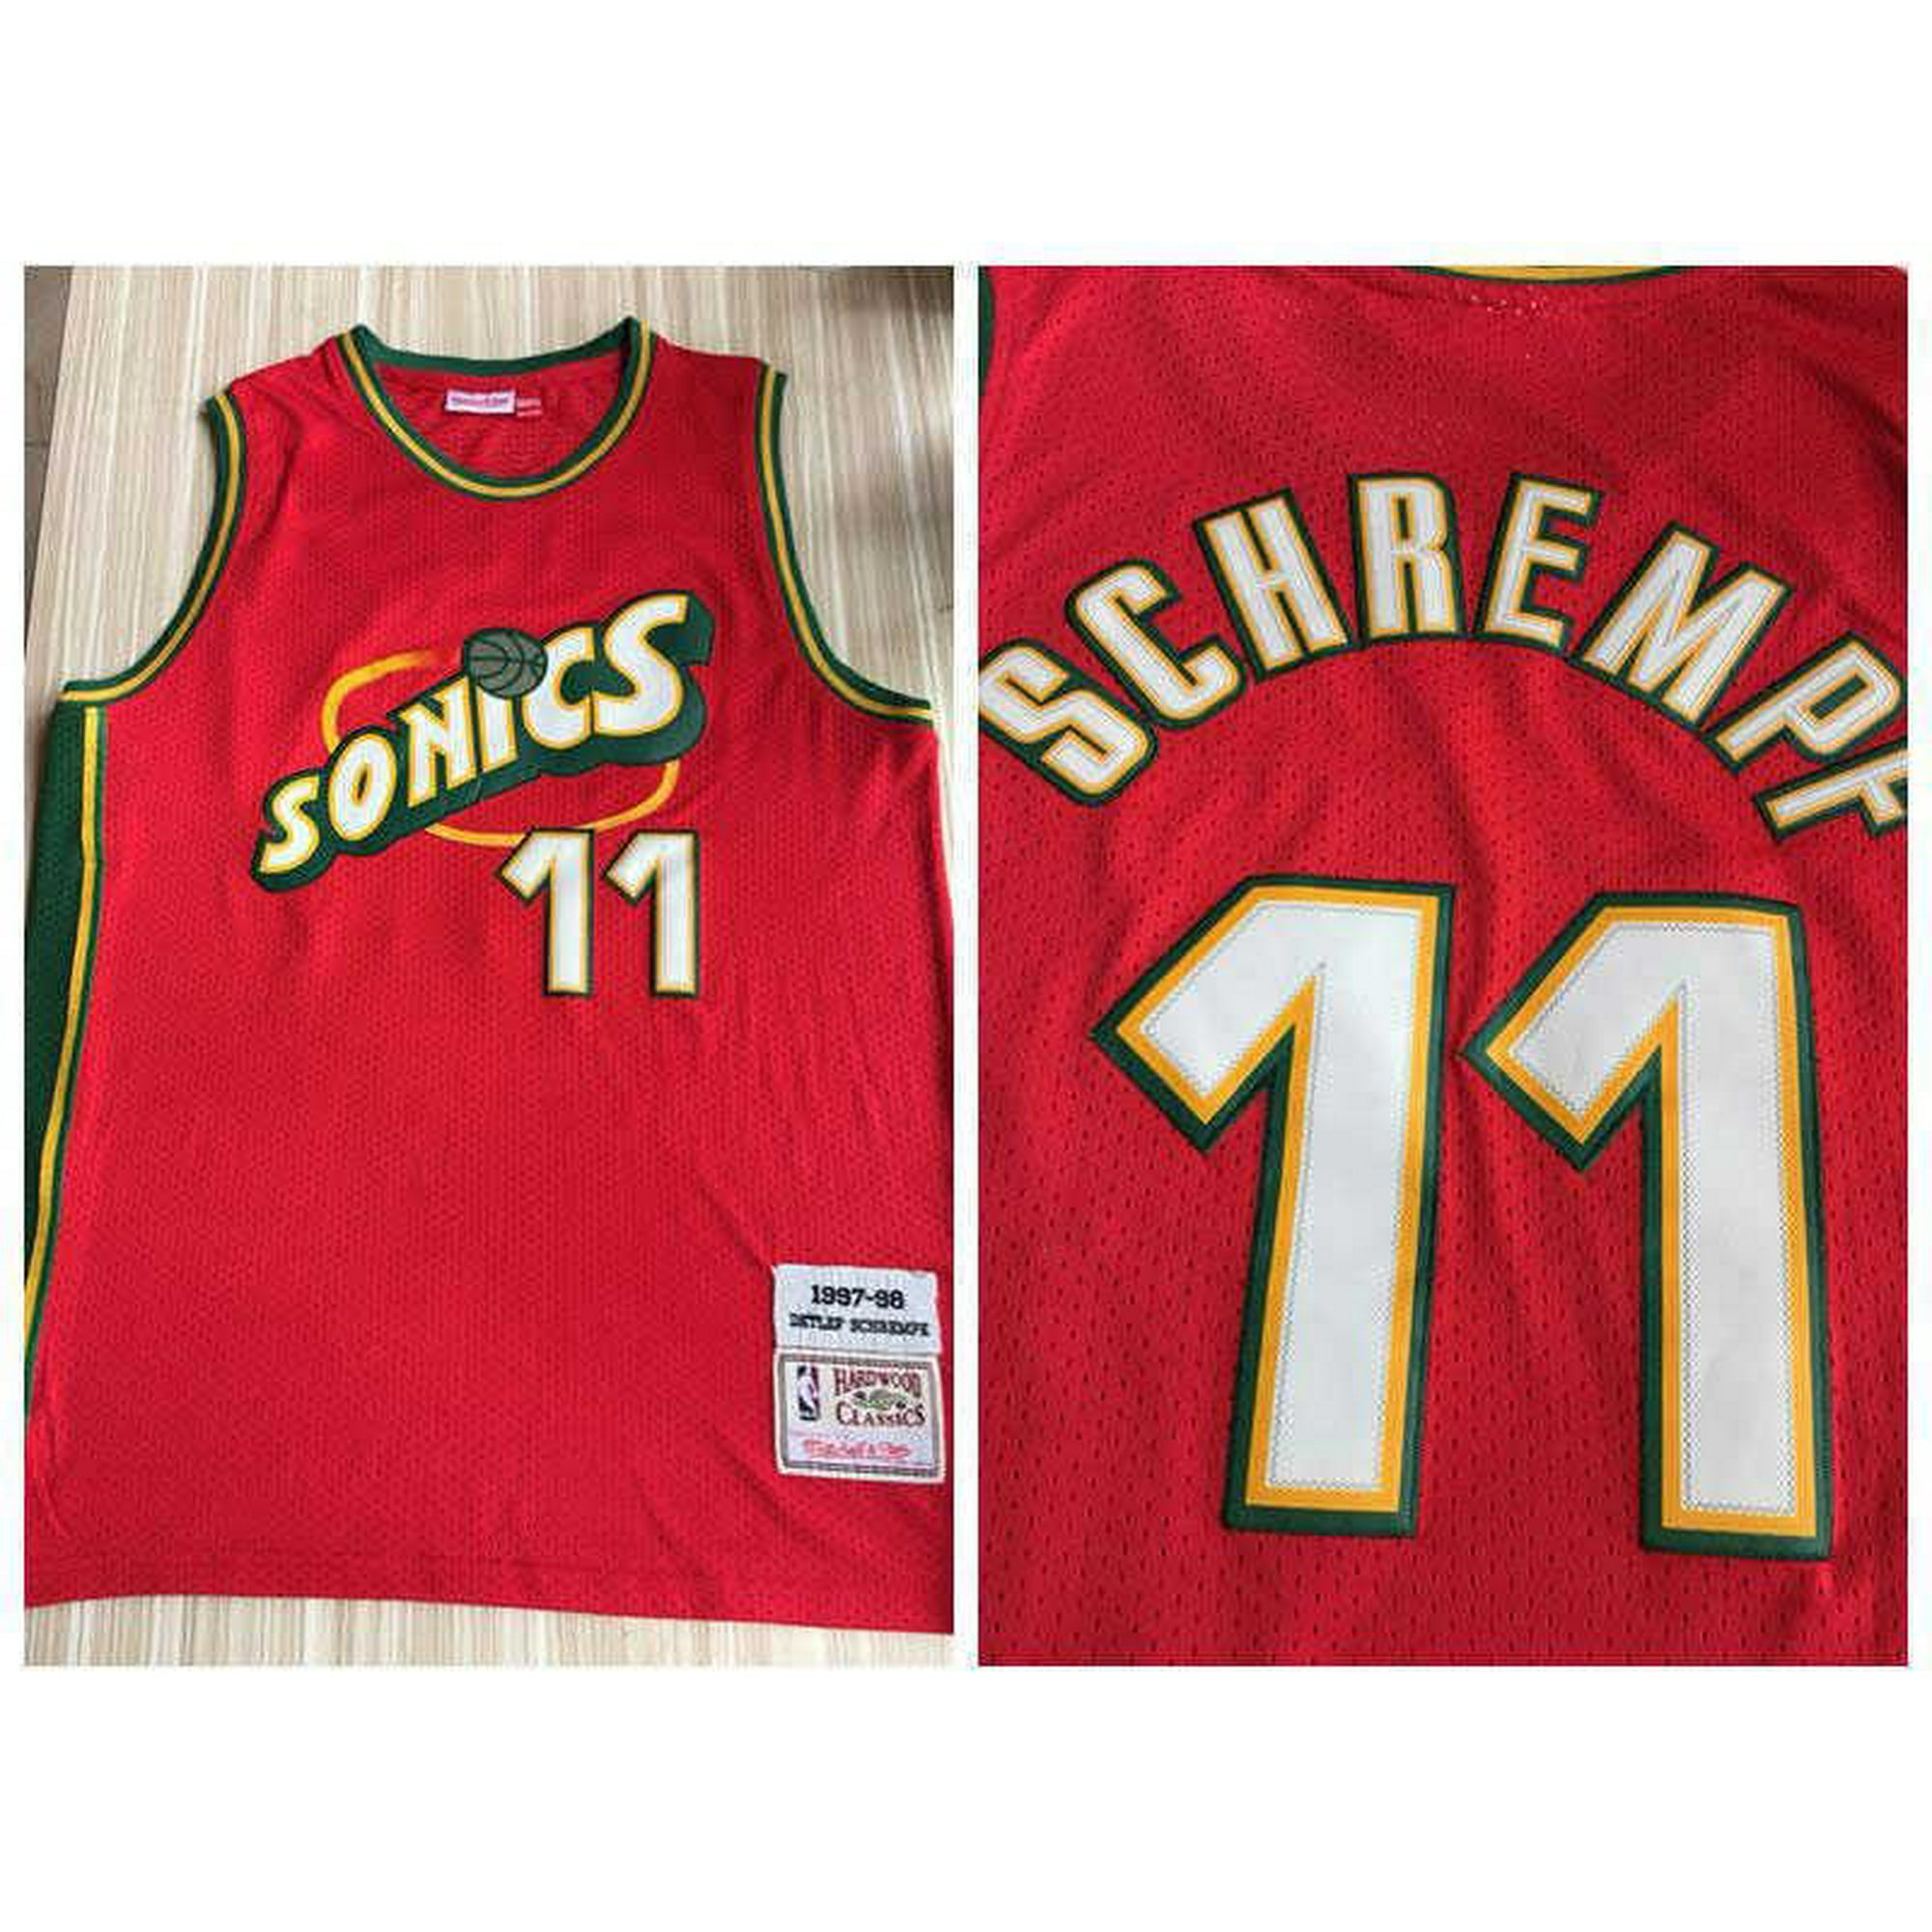 NBA_ jersey Mens Vintage 11 Detlef Schrempf Green White Red 20 The